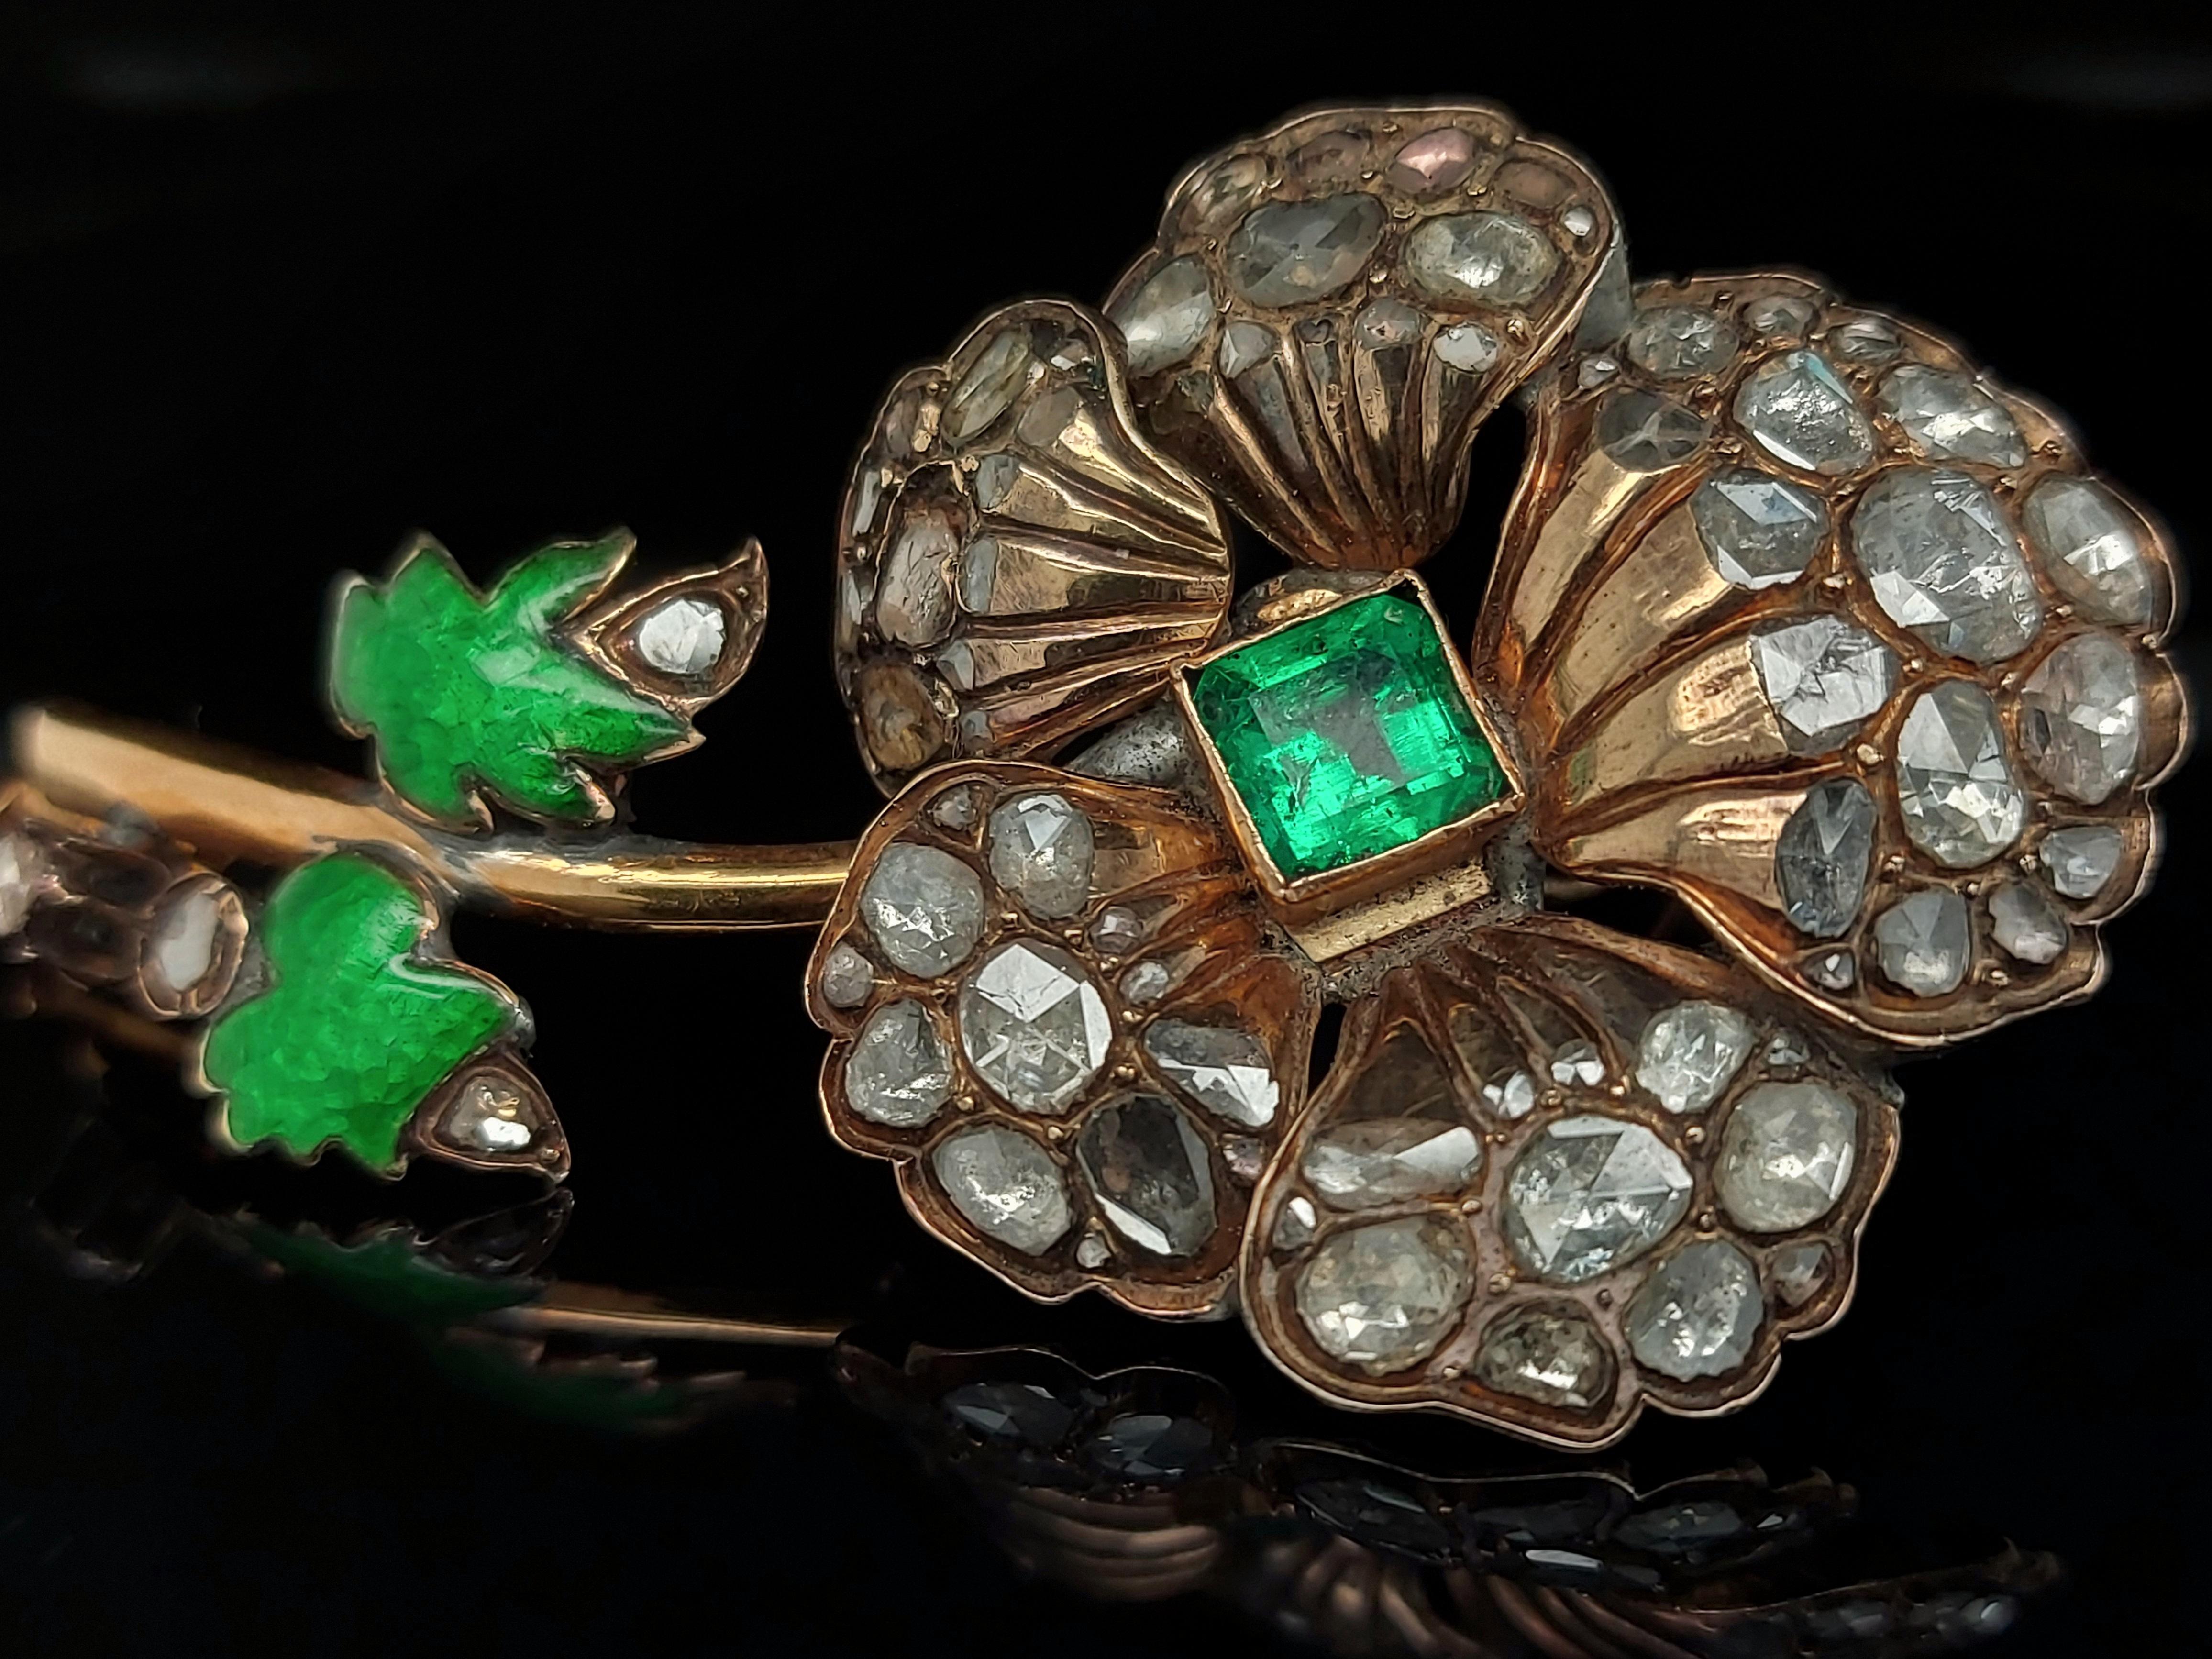 Silver and 14kt Gold Flower Brooch, Rose Cut Diamonds, Colombia Emerald, Enamel For Sale 4